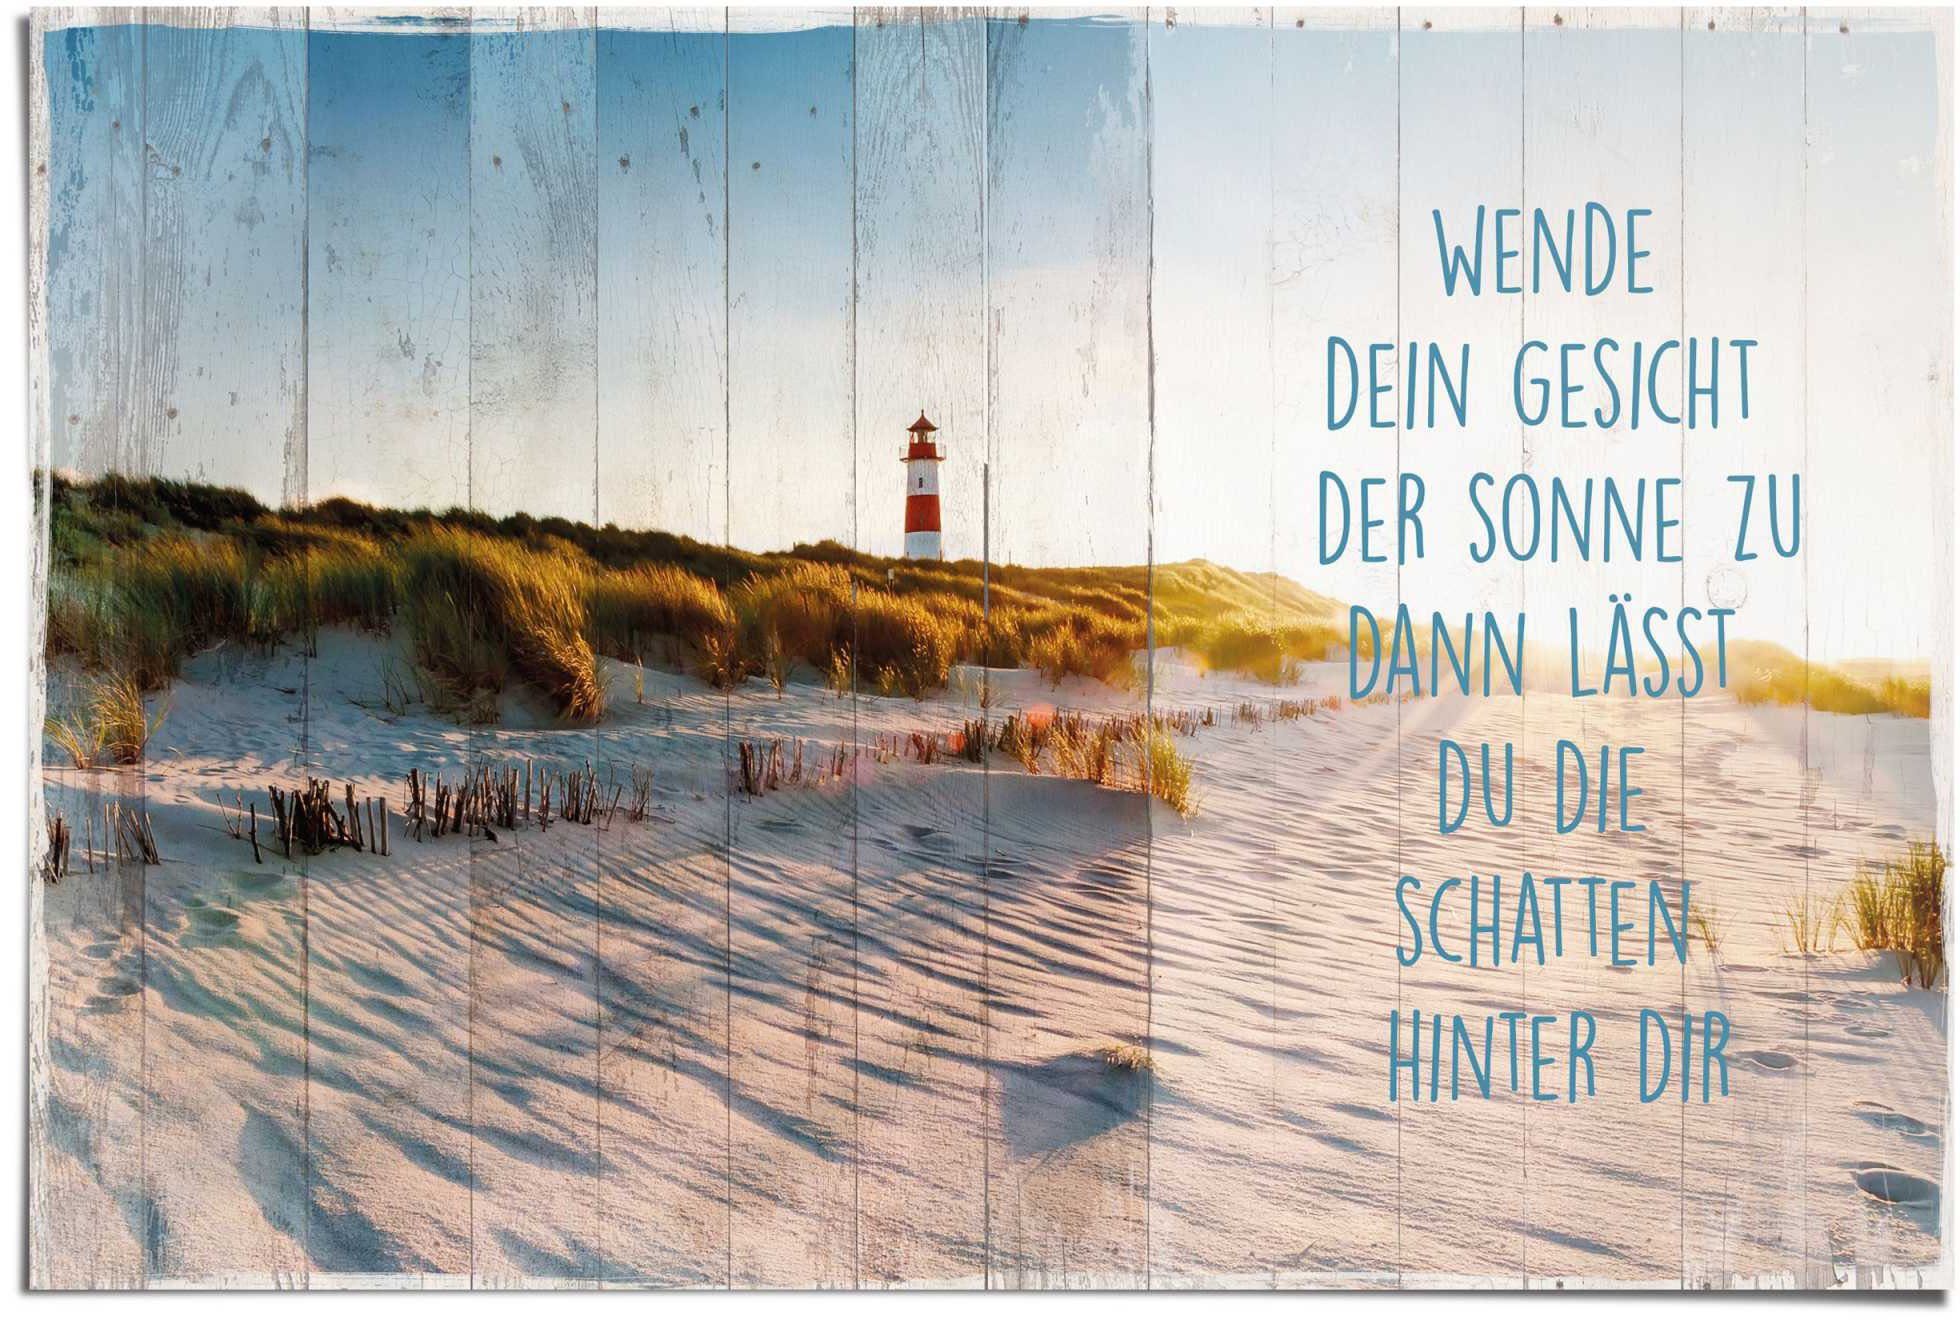 St) am Sonne Reinders! (1 Poster Strand,